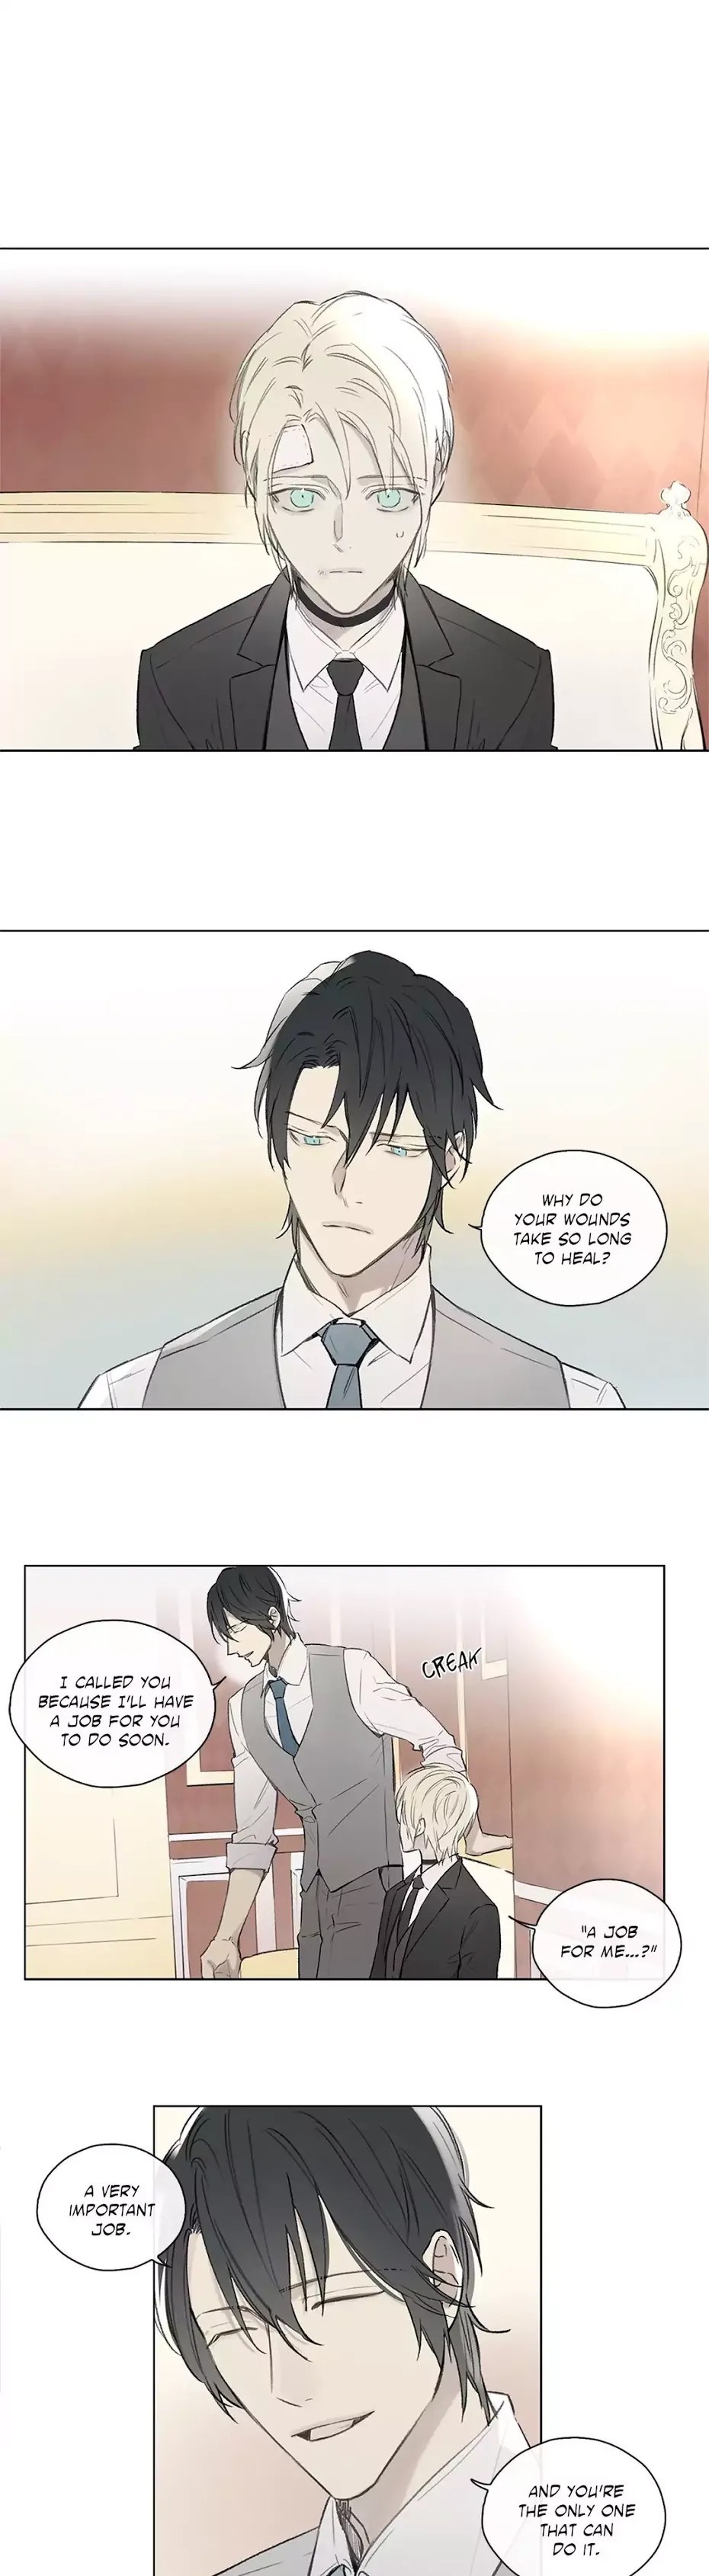 Royal Servant - Chapter 58 Page 1